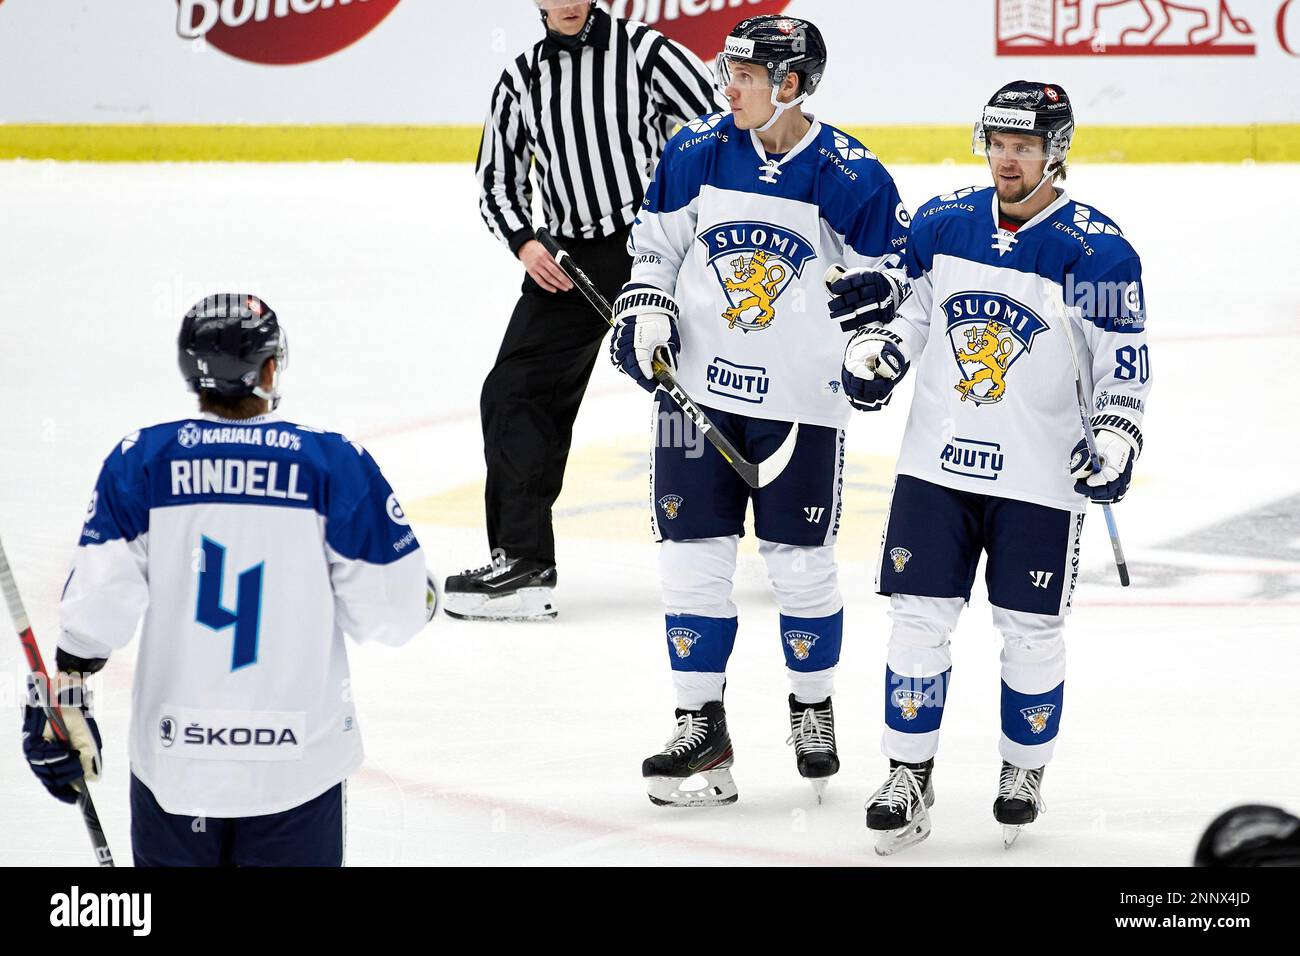 Finlands Teemu Turunen celebrate a goal with team members during the Beijer Hockey Games (Euro Hockey Tour) ice hockey match between Finland and Czech Republic at the Malmo Arena in Malmo, Sweden,